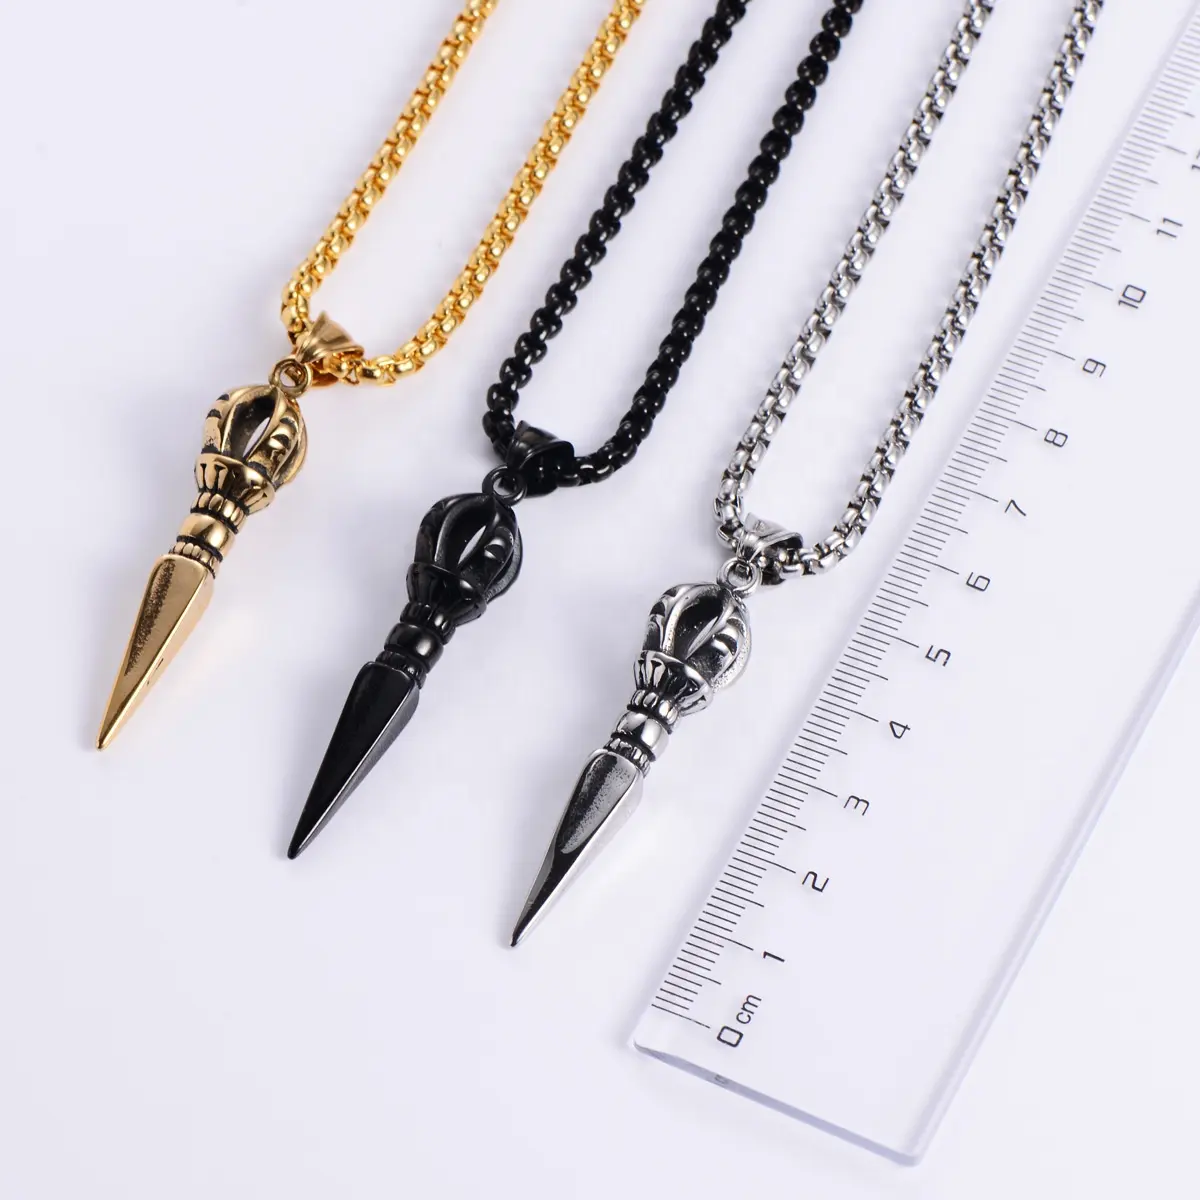 Chinese rock style retro Punk Jewelry Necklace Silver Black Gold Punk Men's Pestle Pendant Necklace for Guys